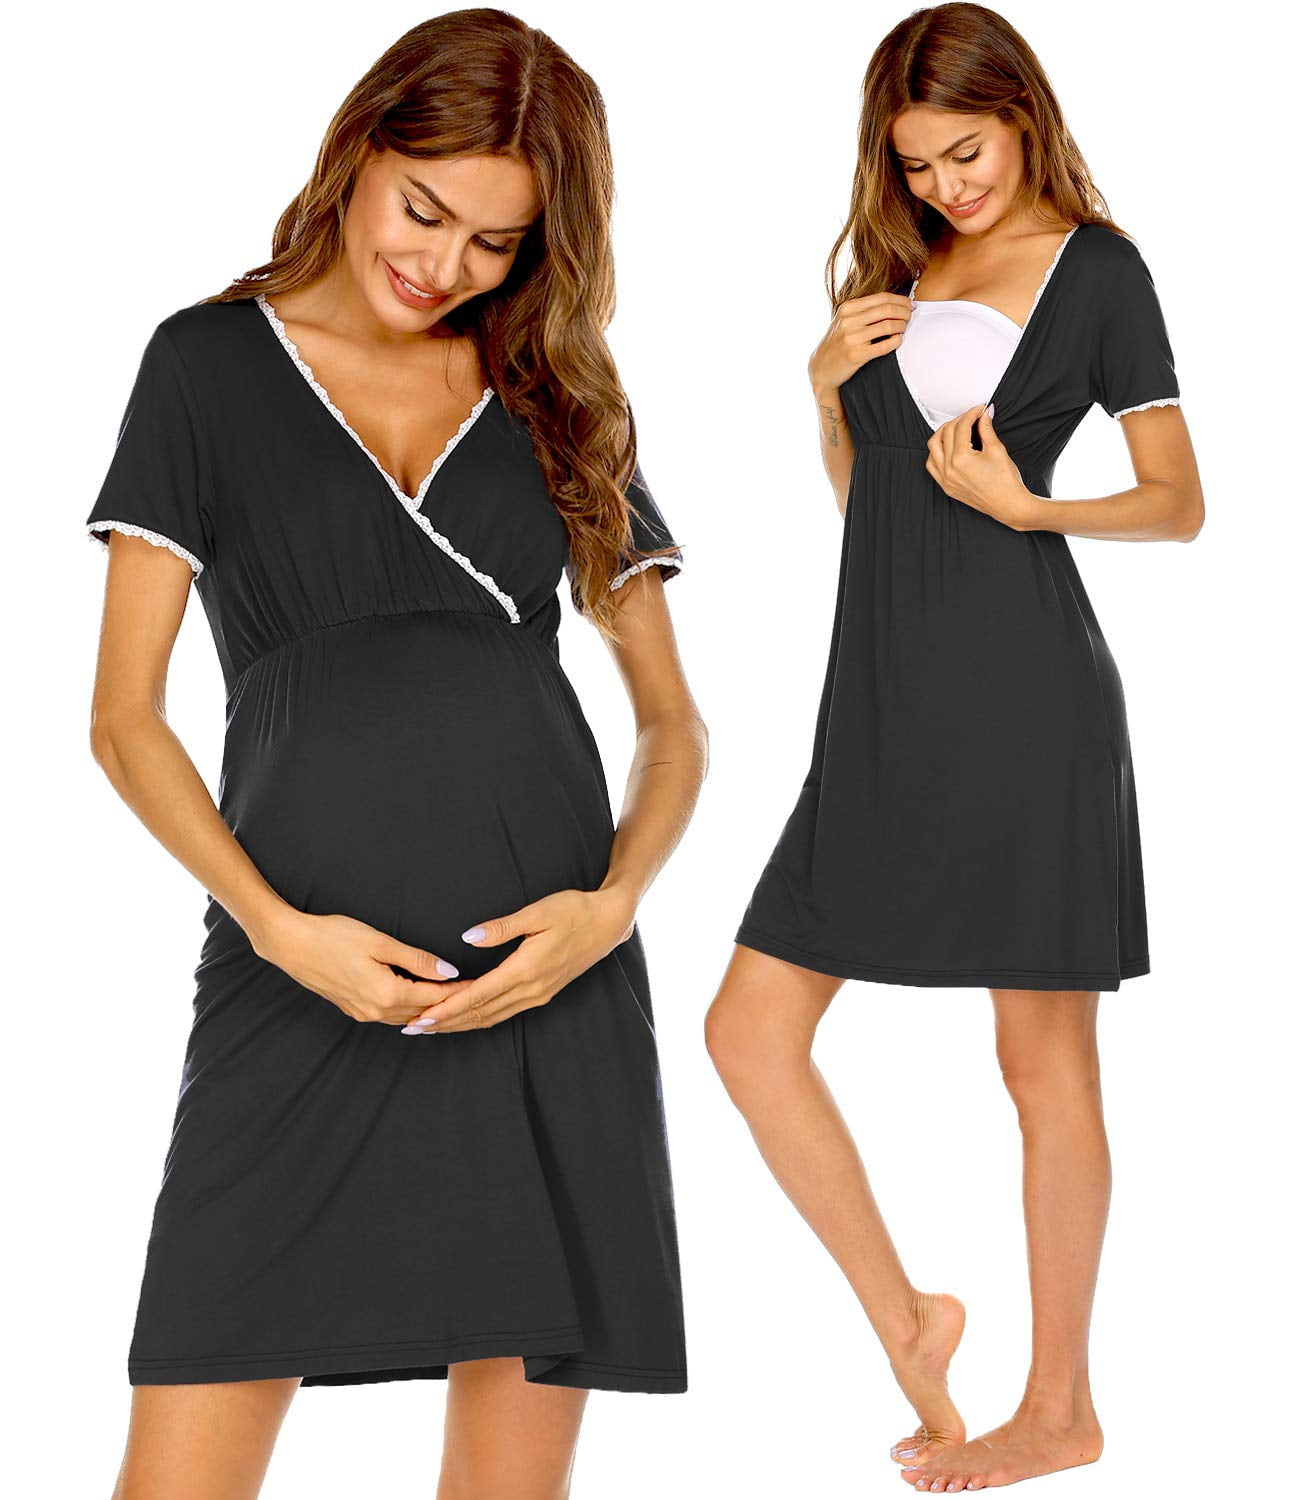 FridaMom Delivery and Nursing Gown